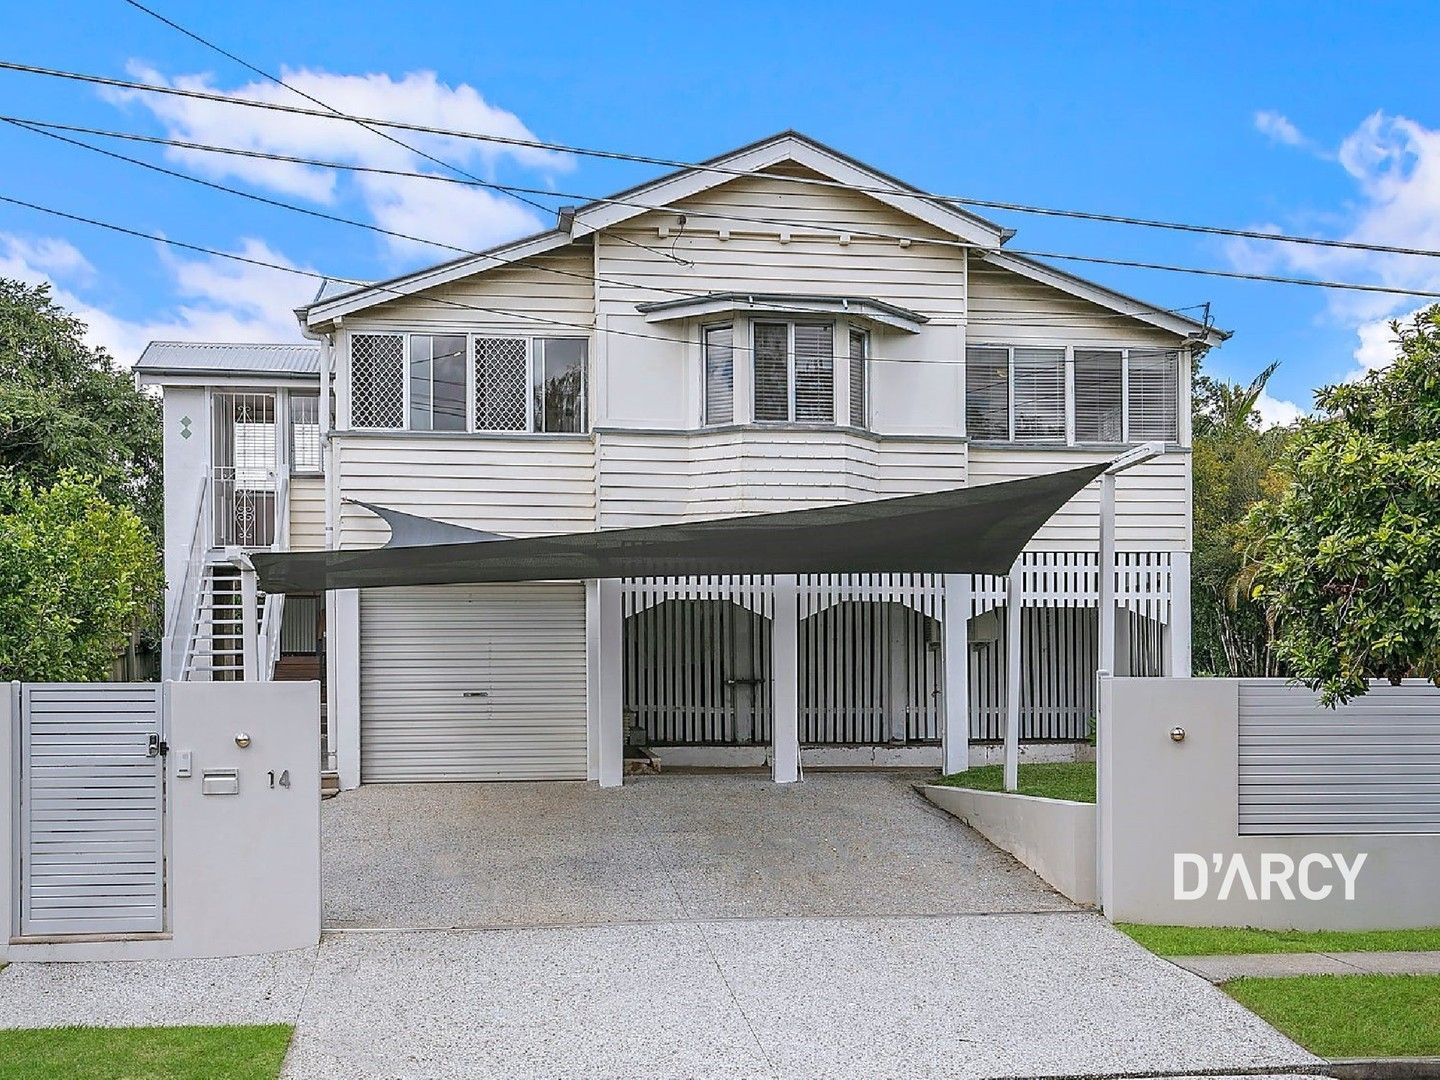 4 bedrooms House in 14 Devoy street ASHGROVE QLD, 4060